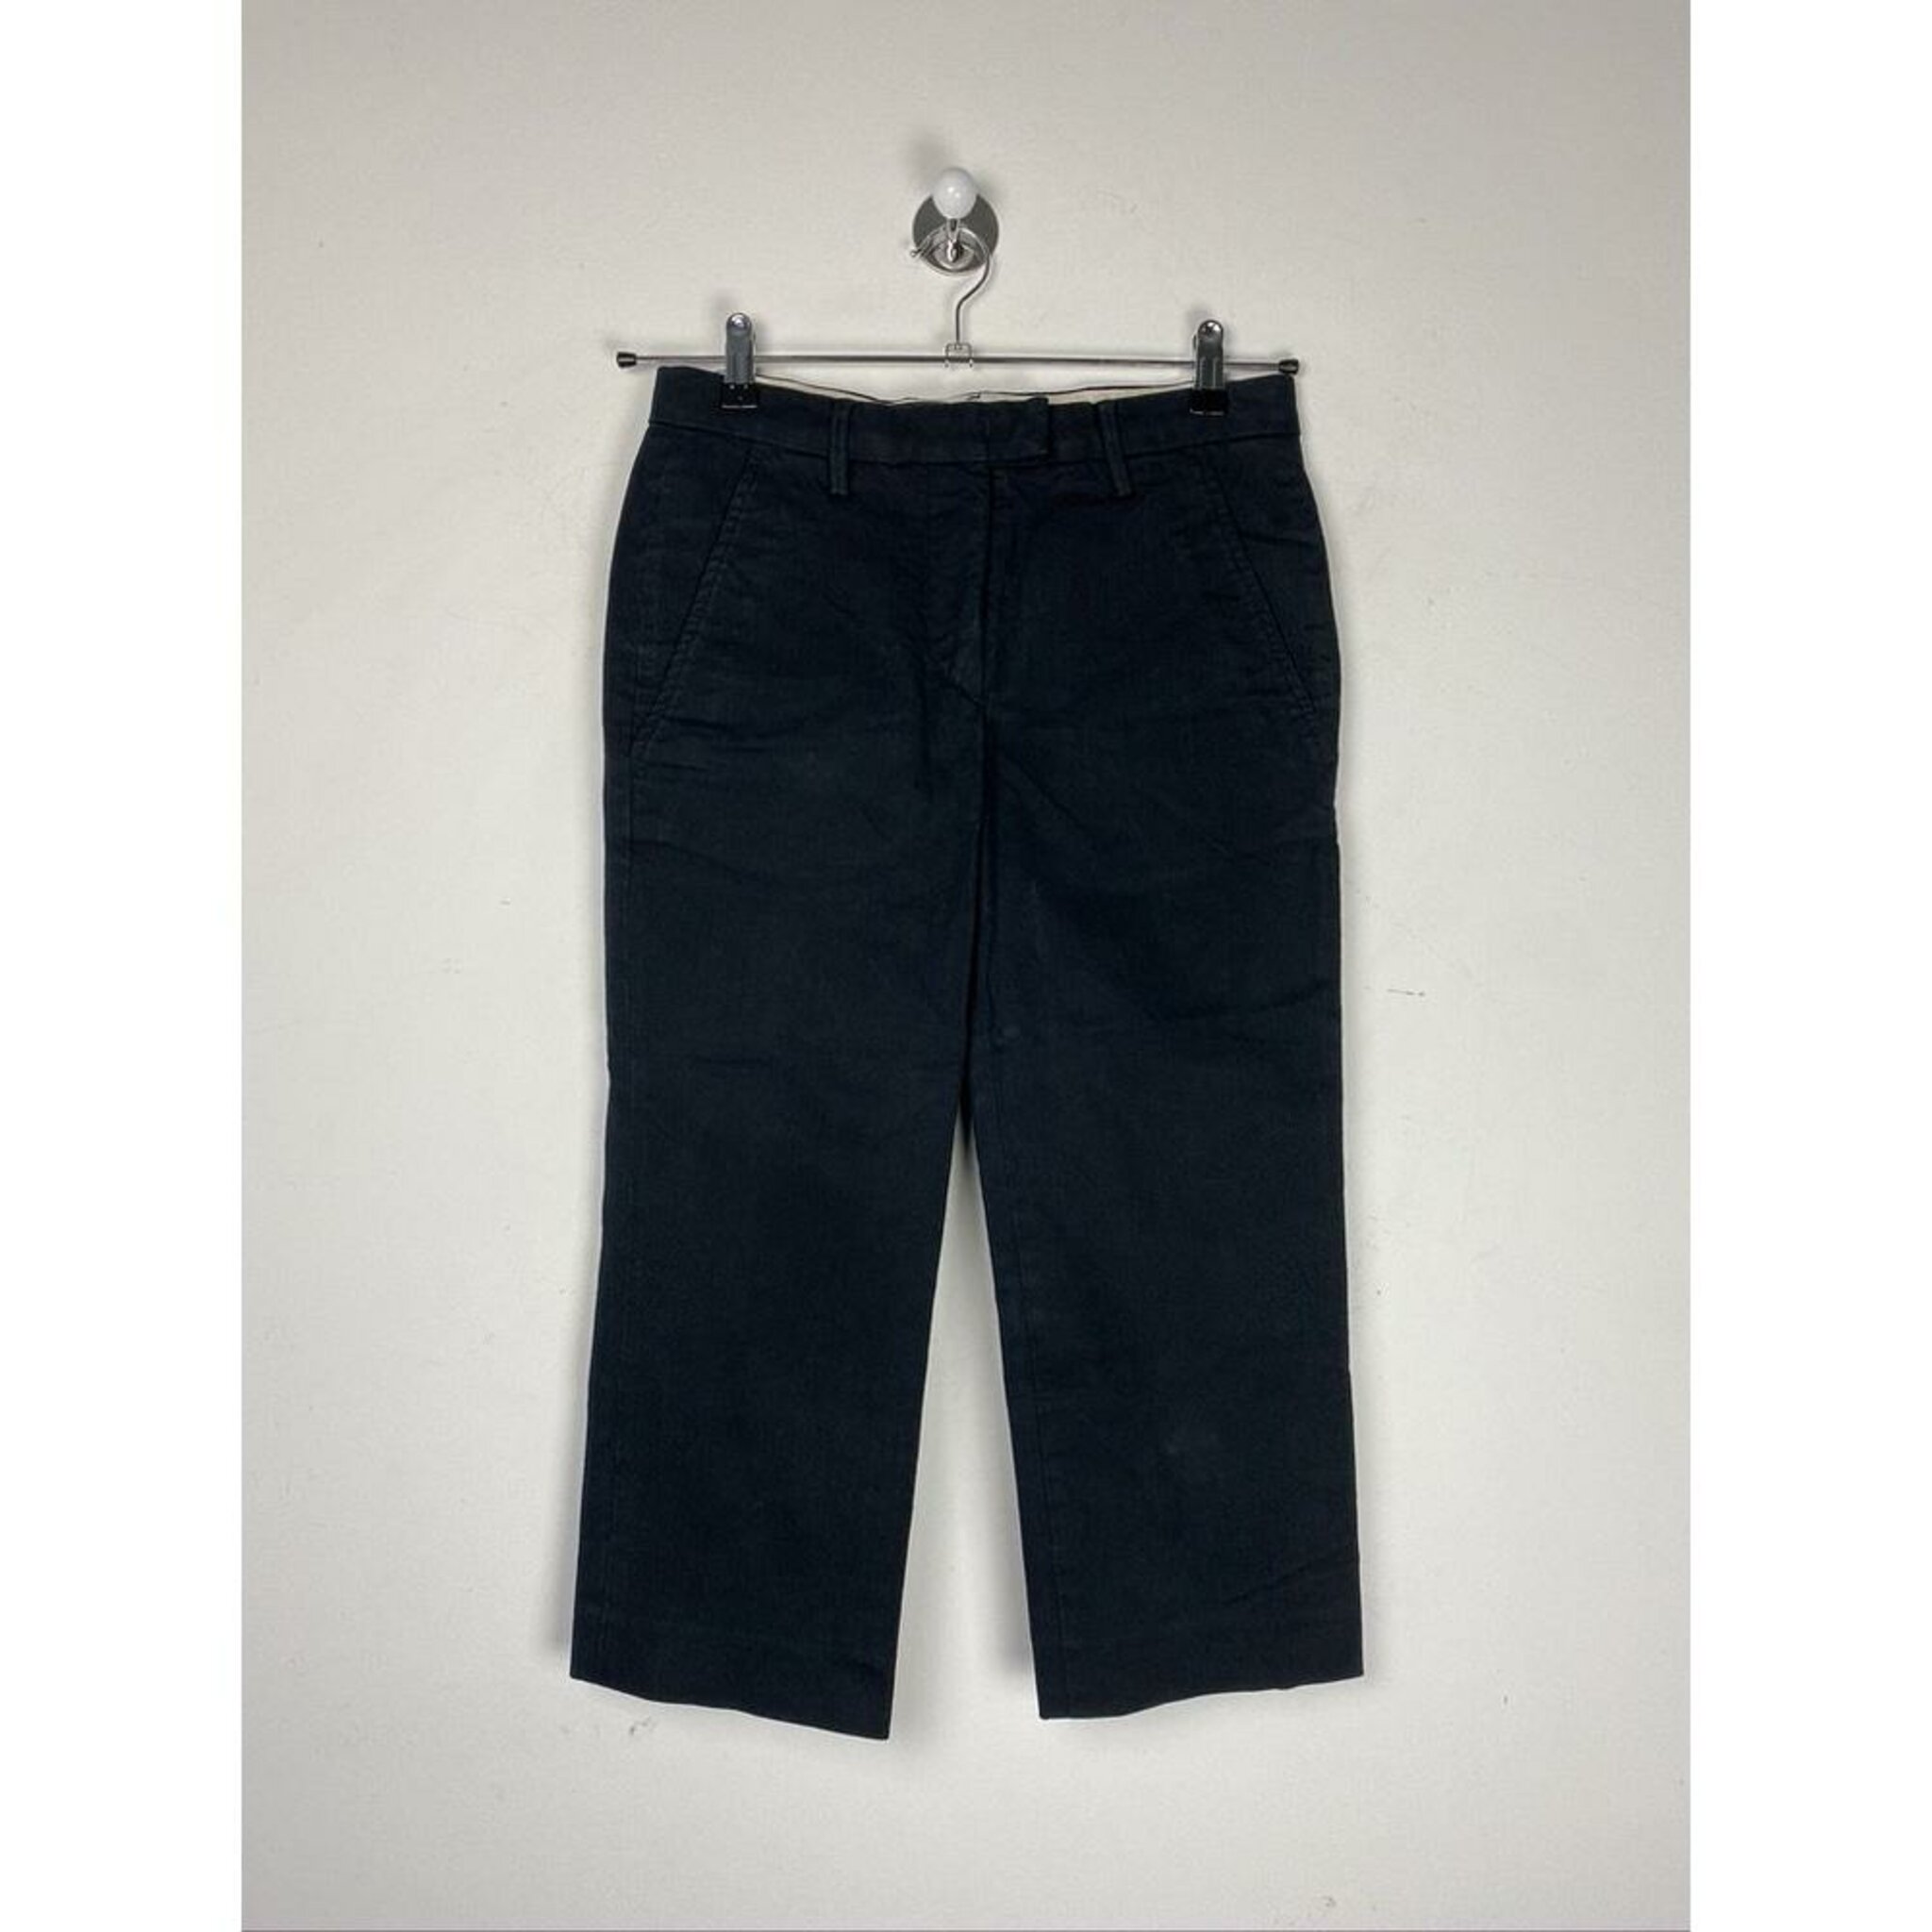 Culottes Pants by Isabel Marant, S, navy